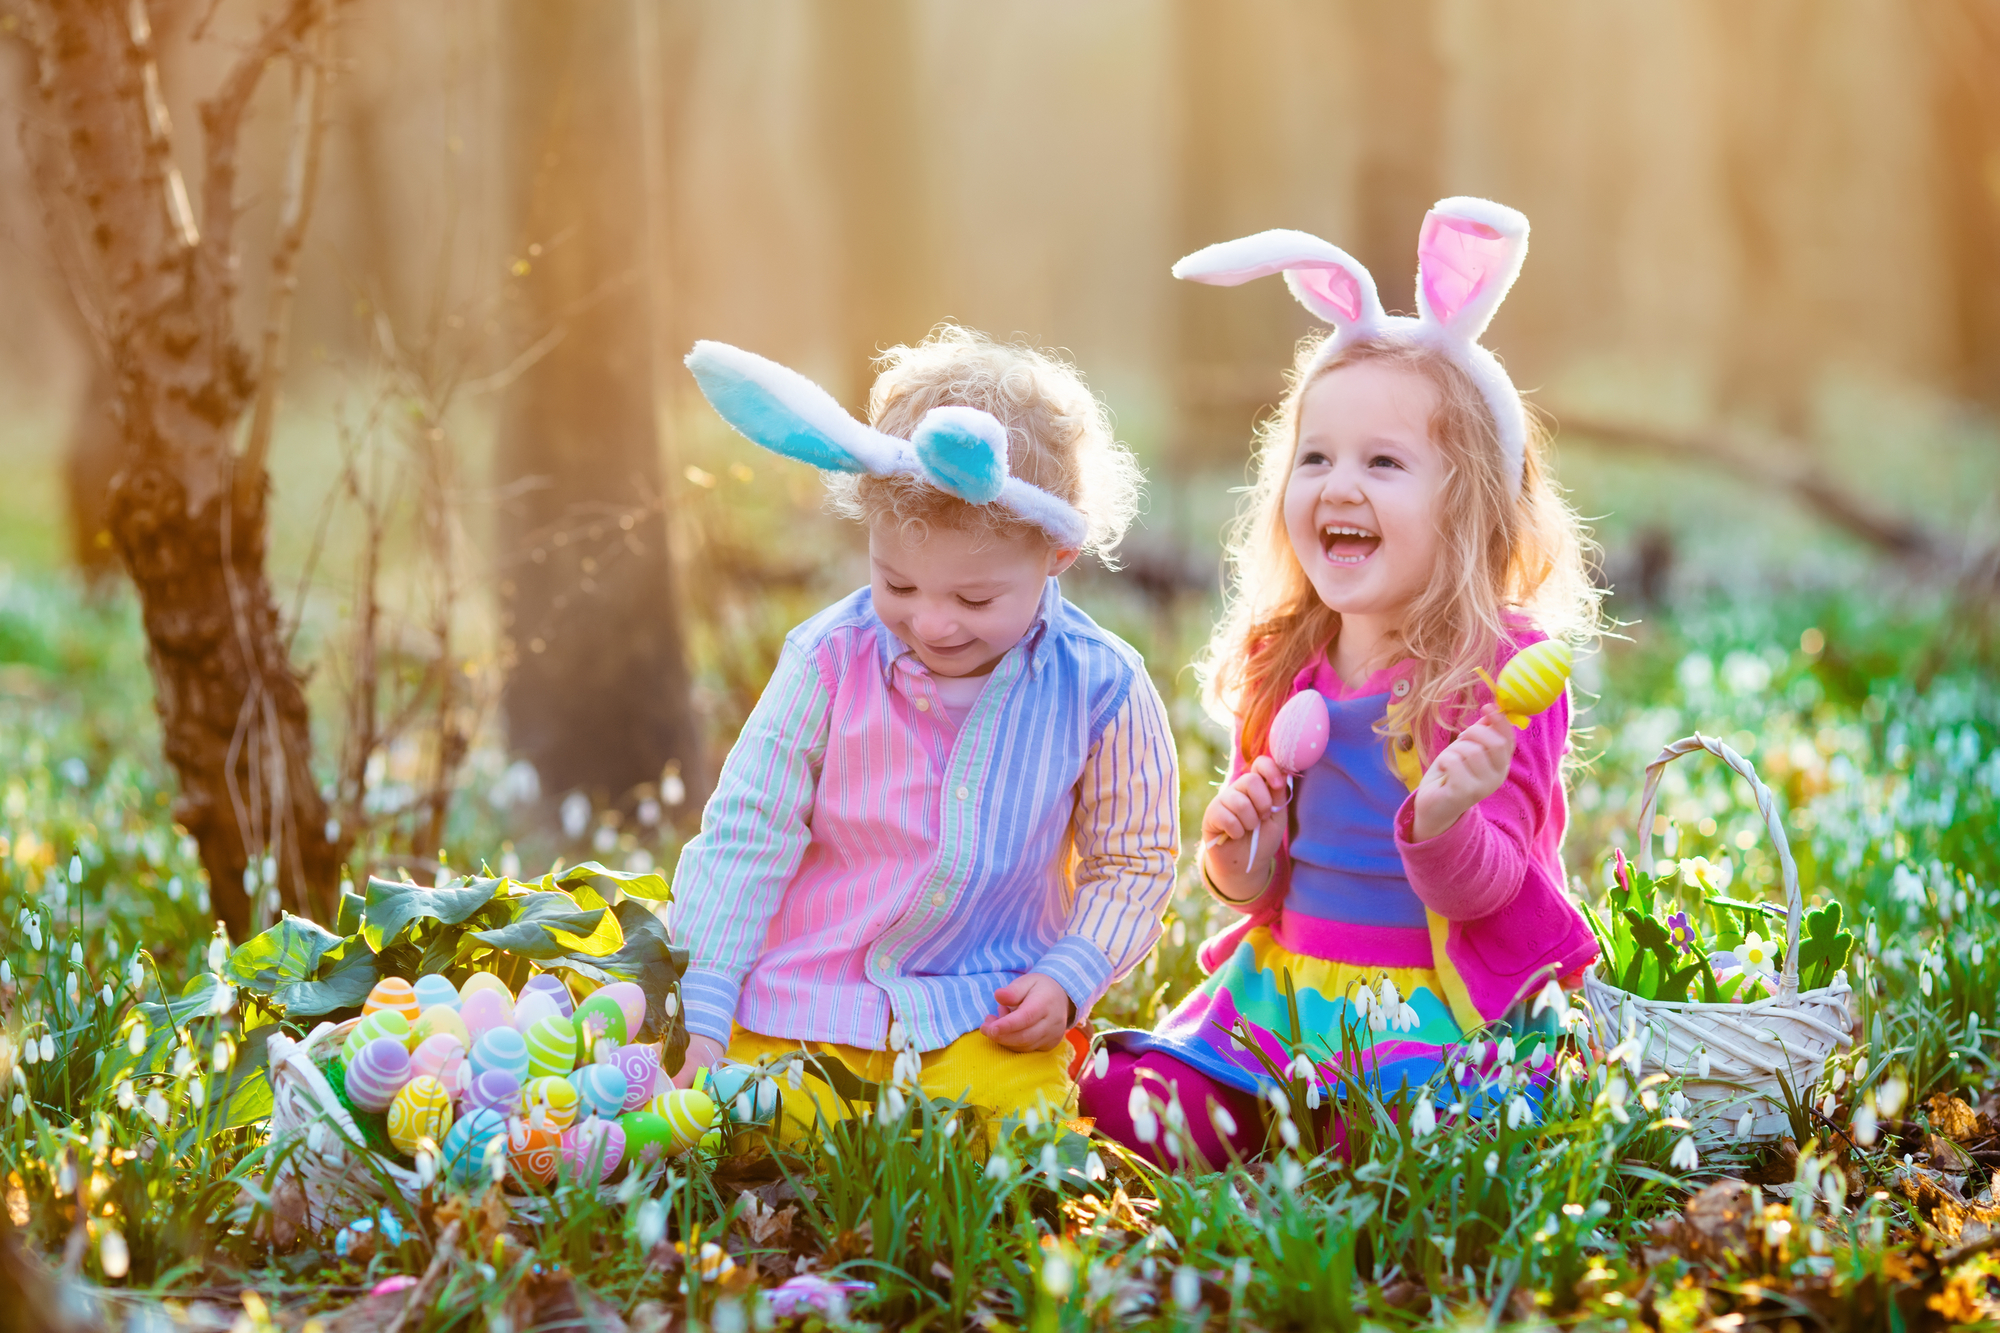 Easter activities for kids | Easter | Easter activities | Easter Sunday | activities for kids | kids | activities 